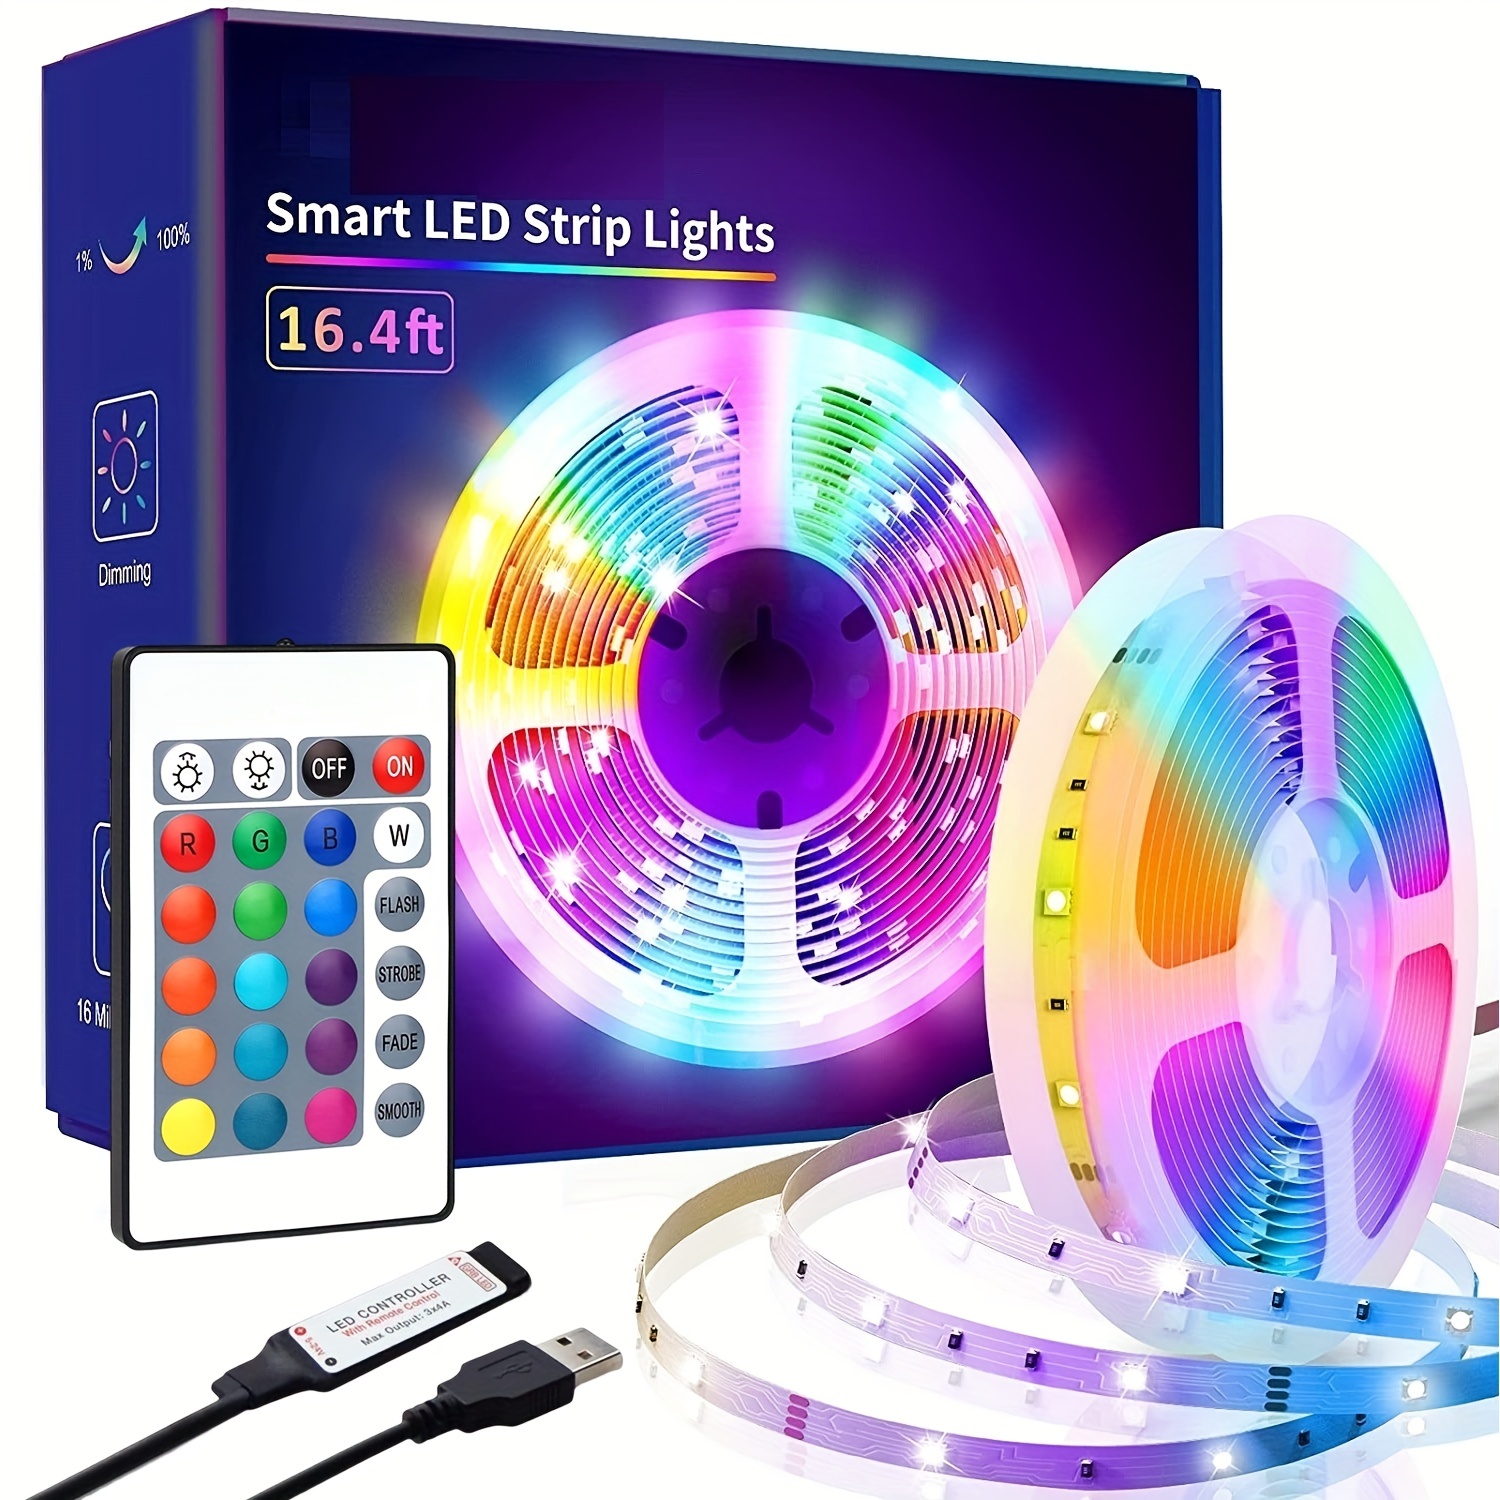 TzumiLED ColorWorks LED Lights, USB-powered Fireworks LED Light Strip with  Music Sync and Remote Control